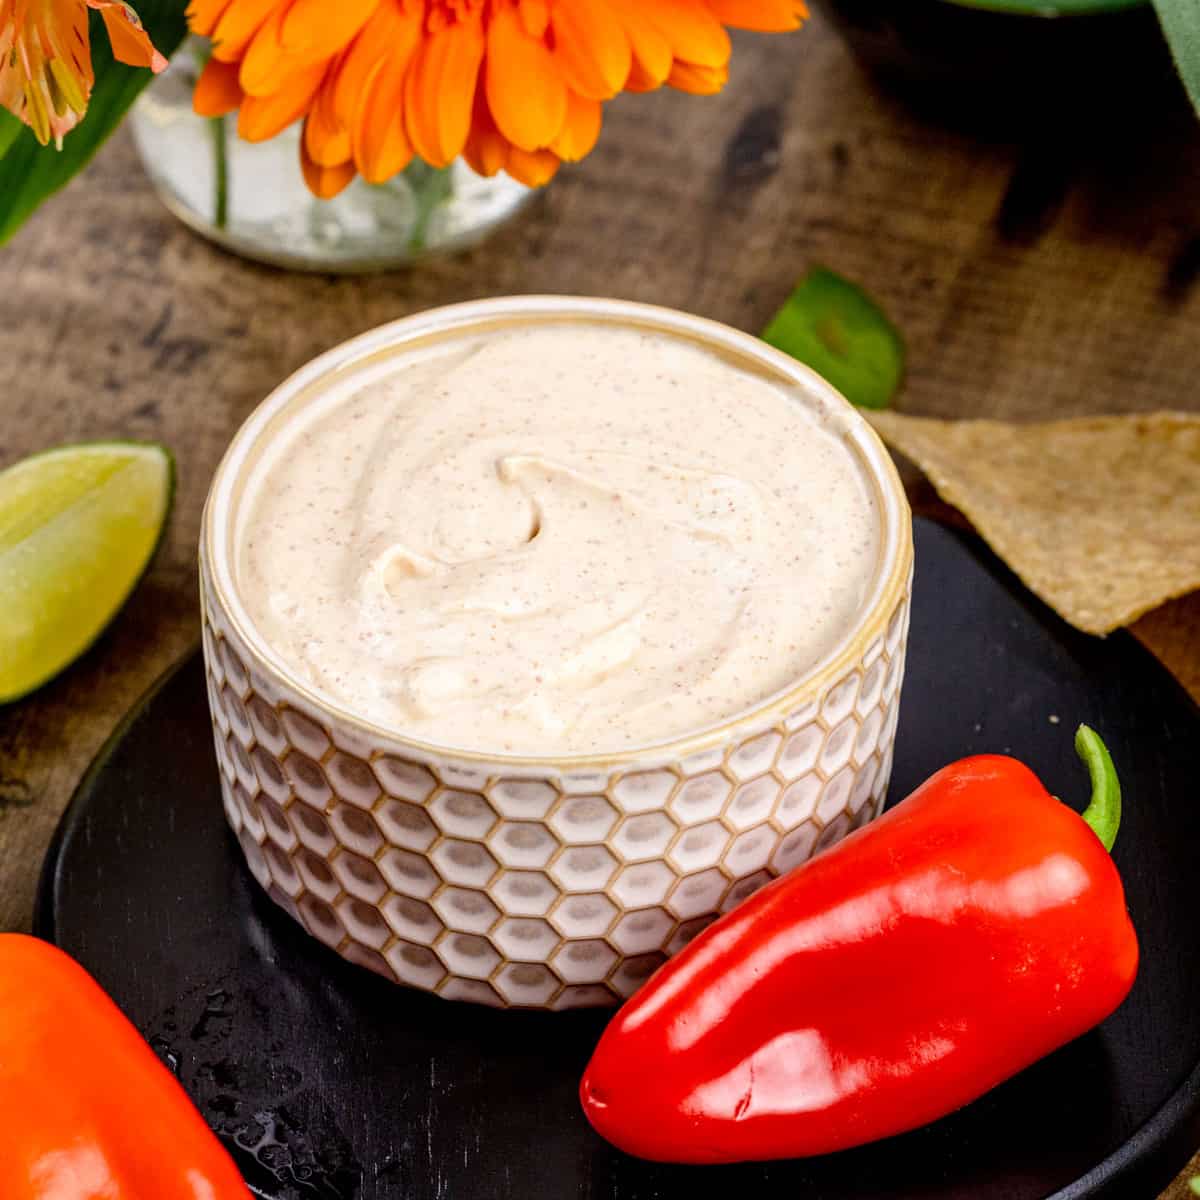 A small bowl filled with fresh dairy free chipotle crema sauce. Fresh red peppers surround the bowl.